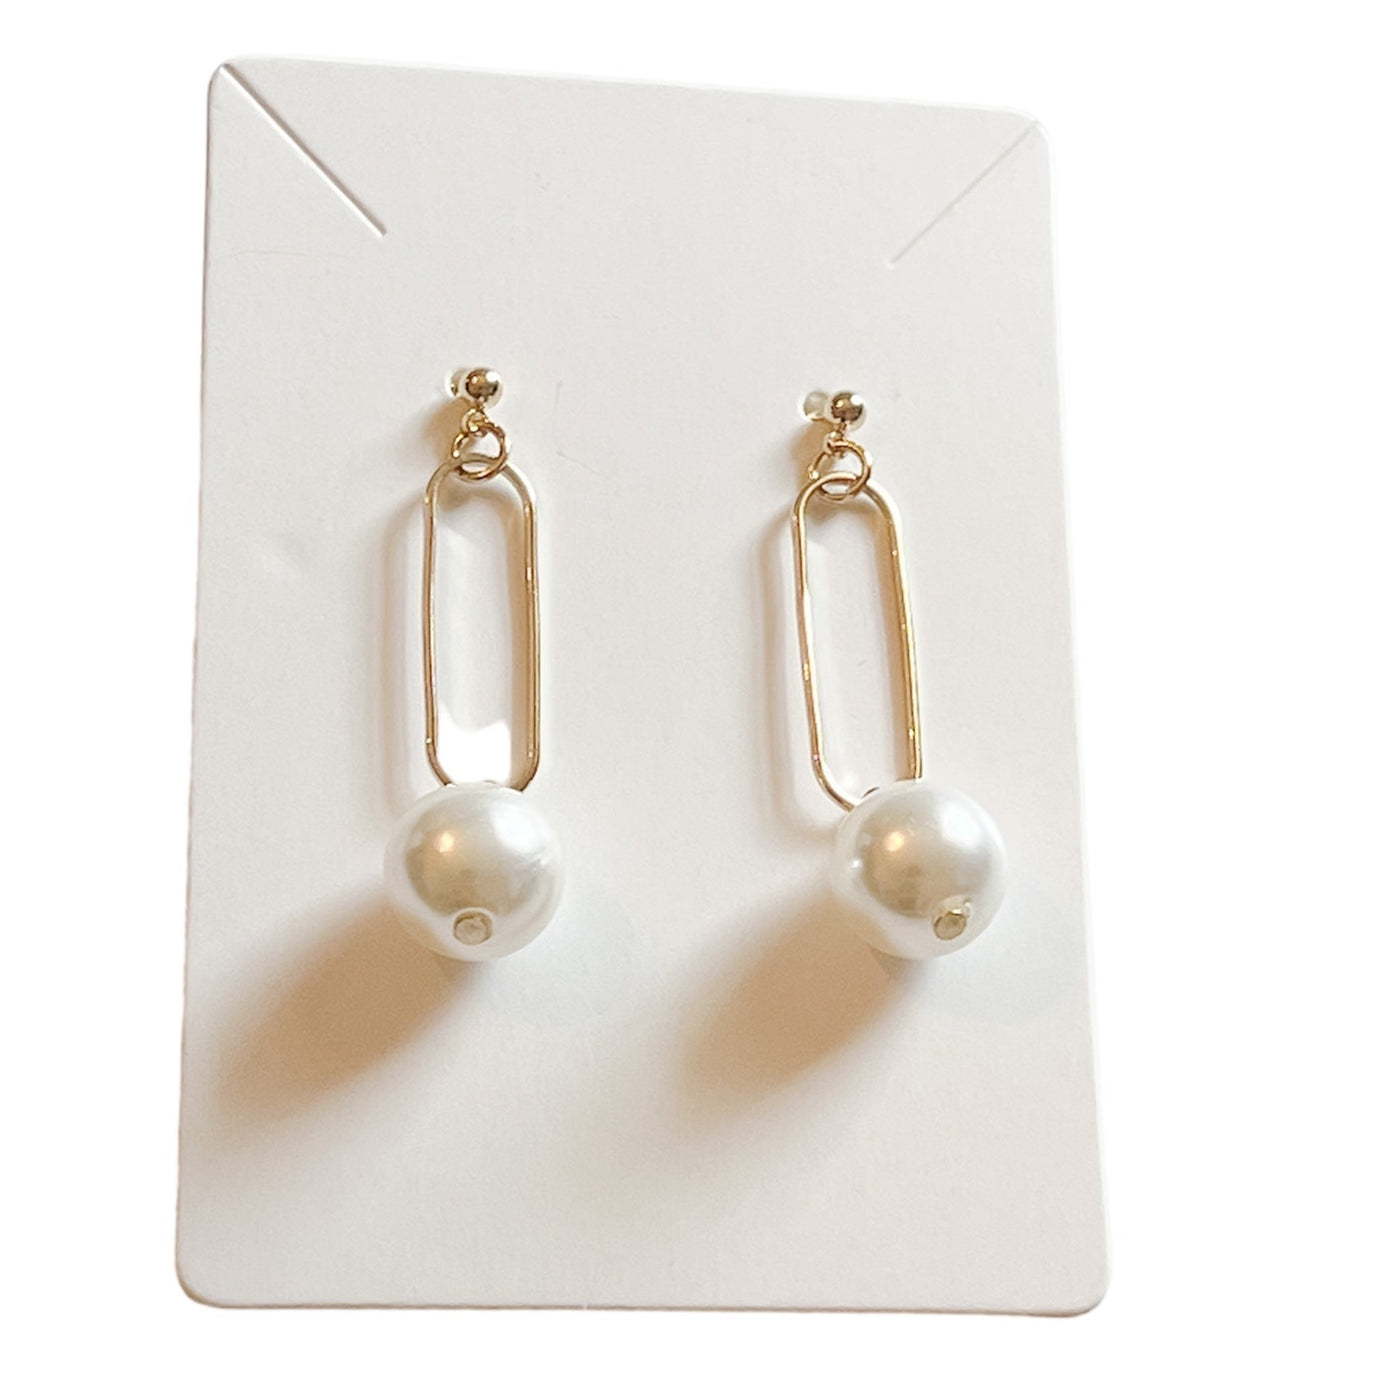 dangle gold design with an oval shape and small pearl charm